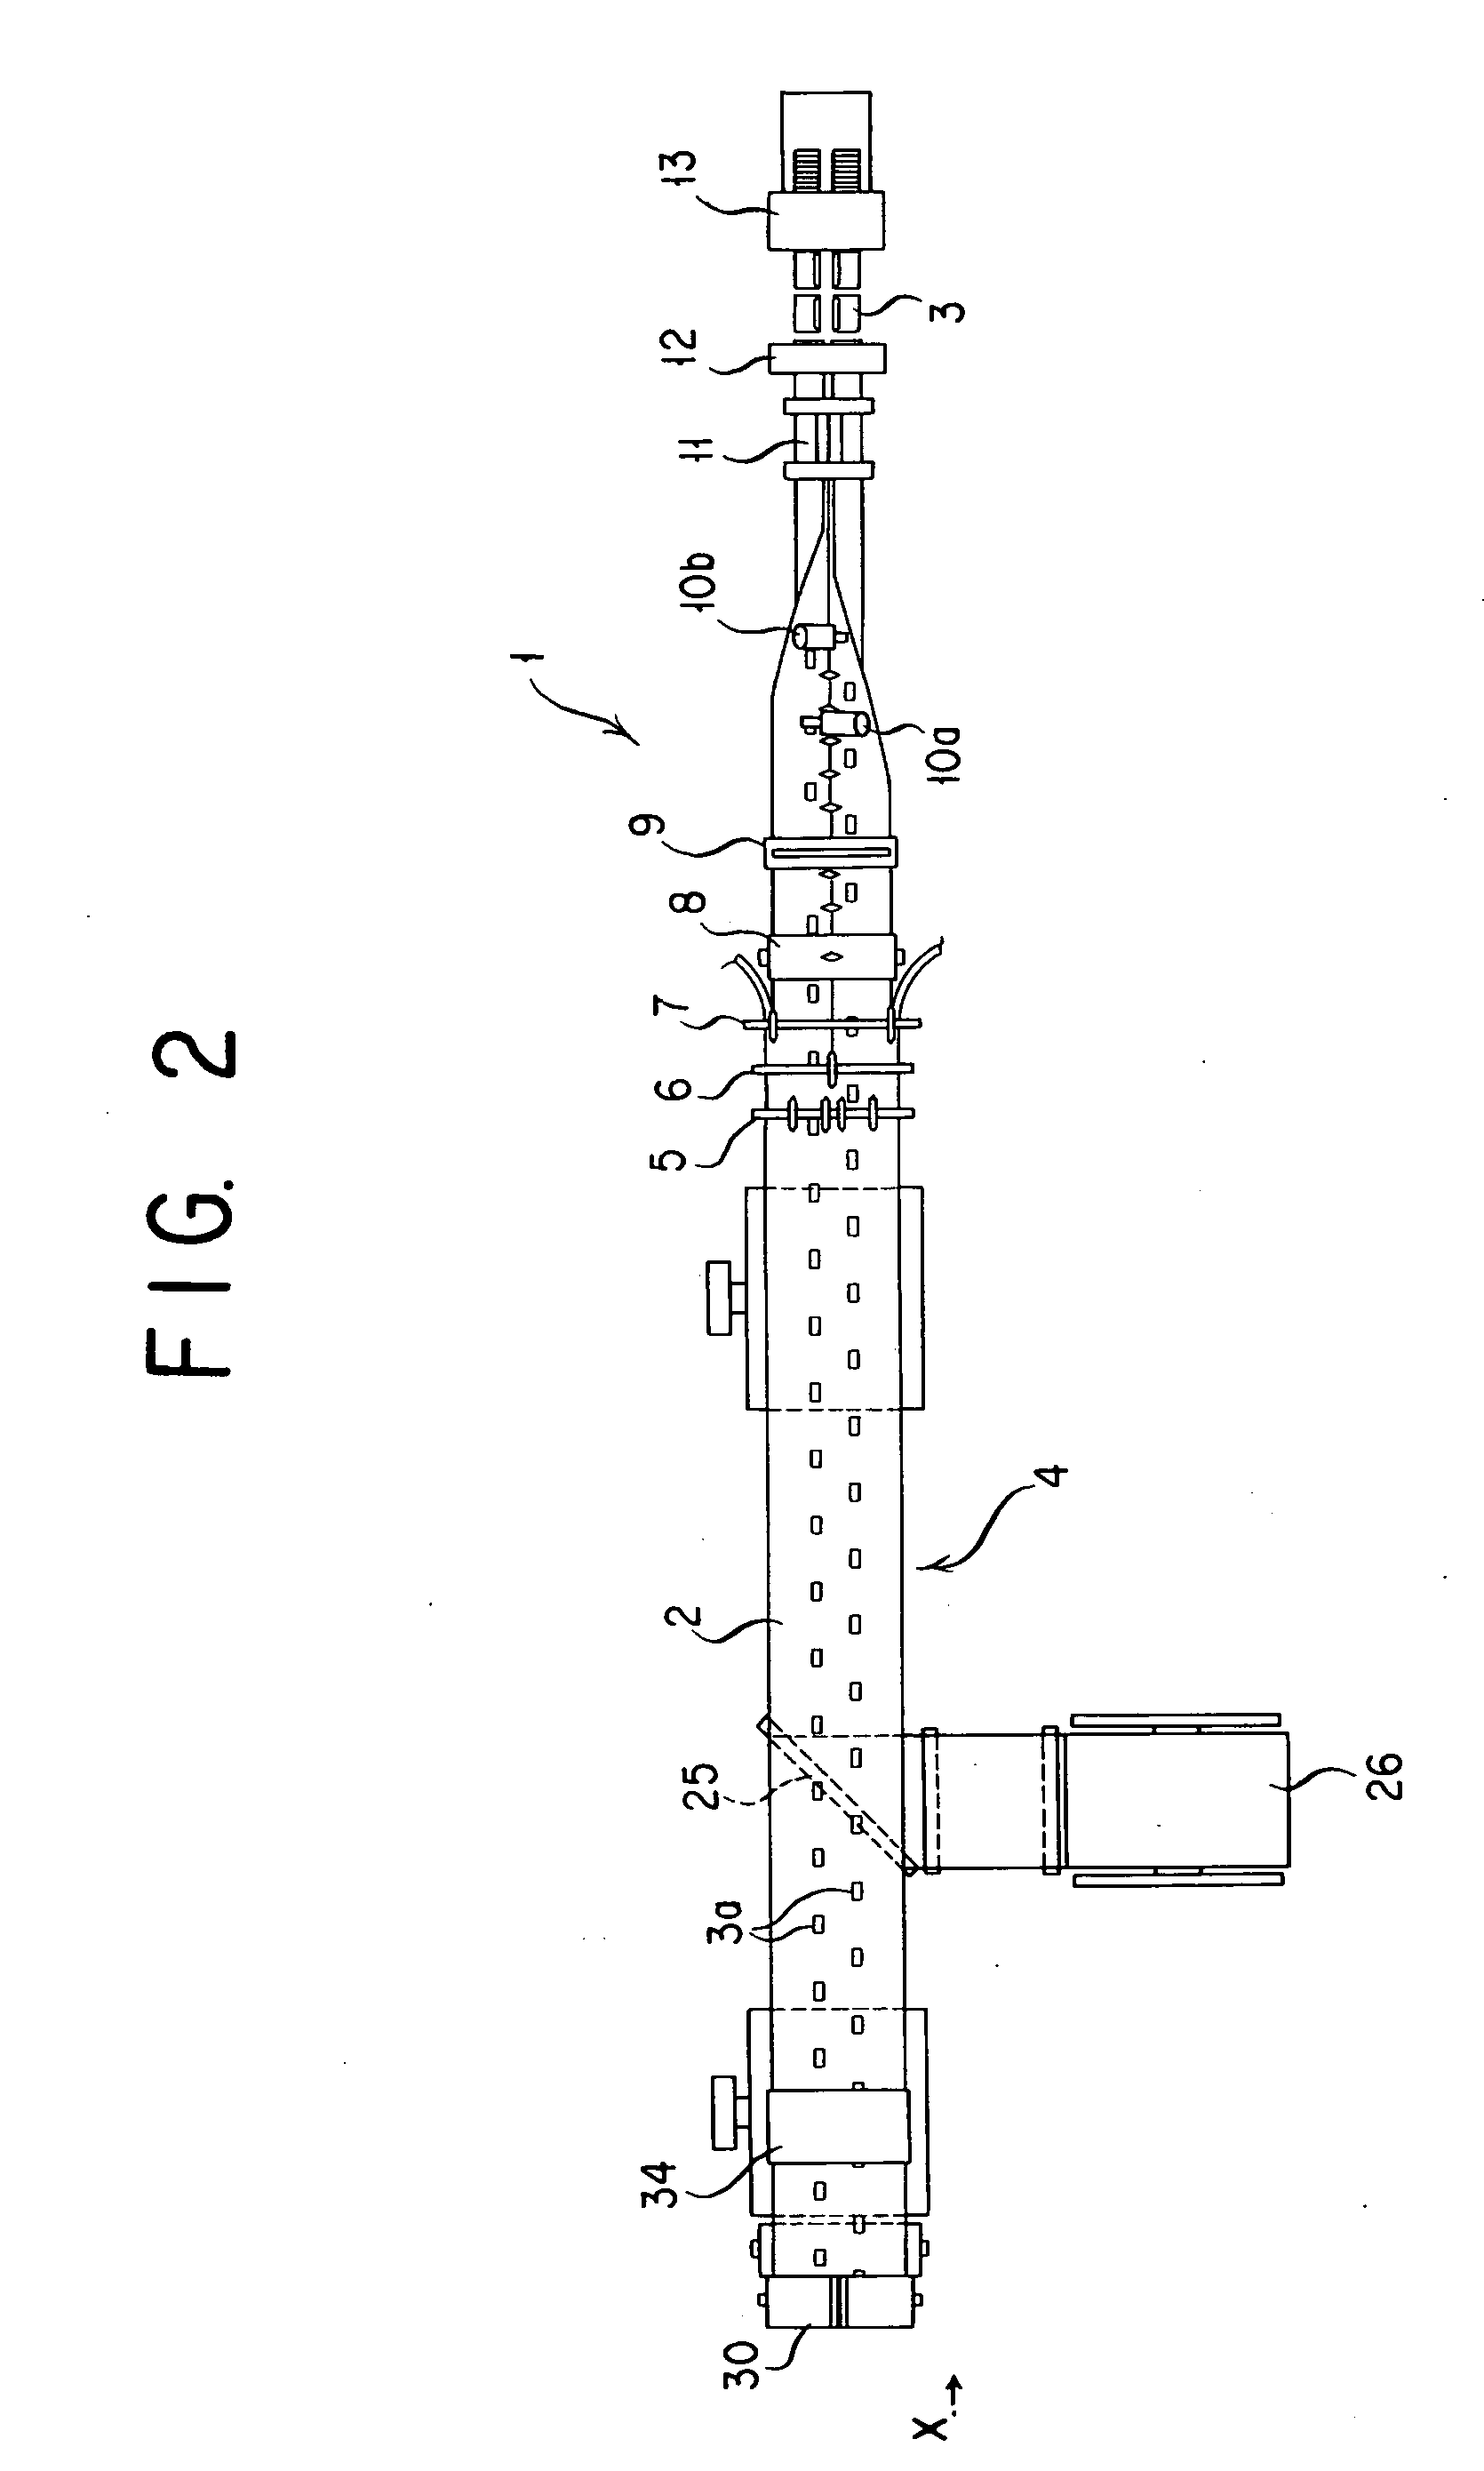 Method of and apparatus for making window envelopes